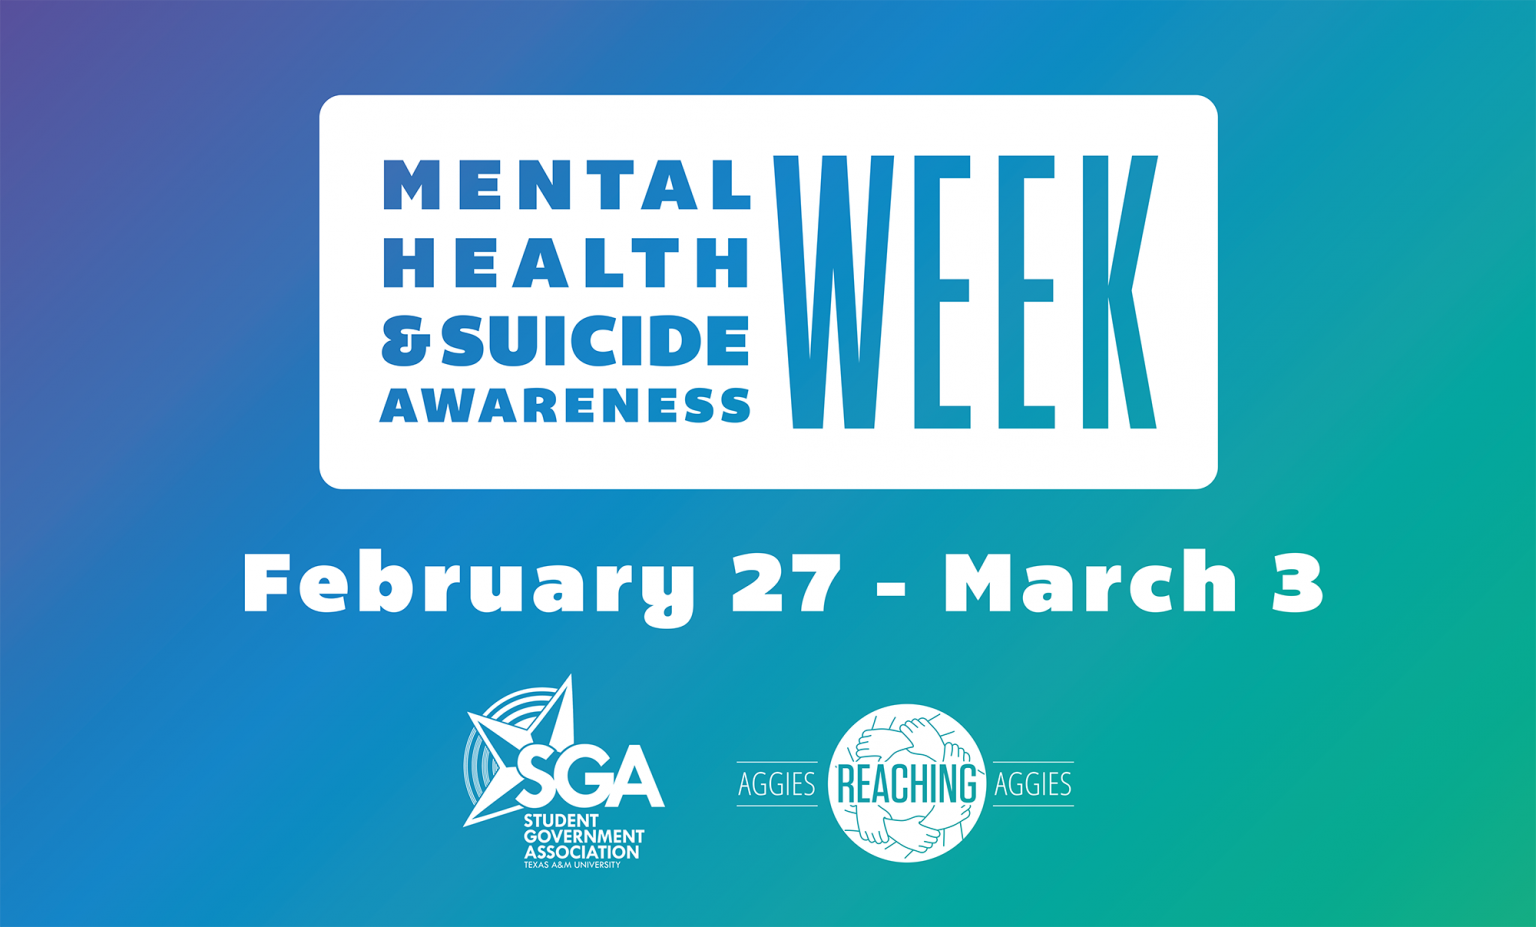 Mental Health & Suicide Awareness Week, taking place February 27 through March 3, cohosted by Texas A&M University Student Government Association and Aggies Reaching Aggies